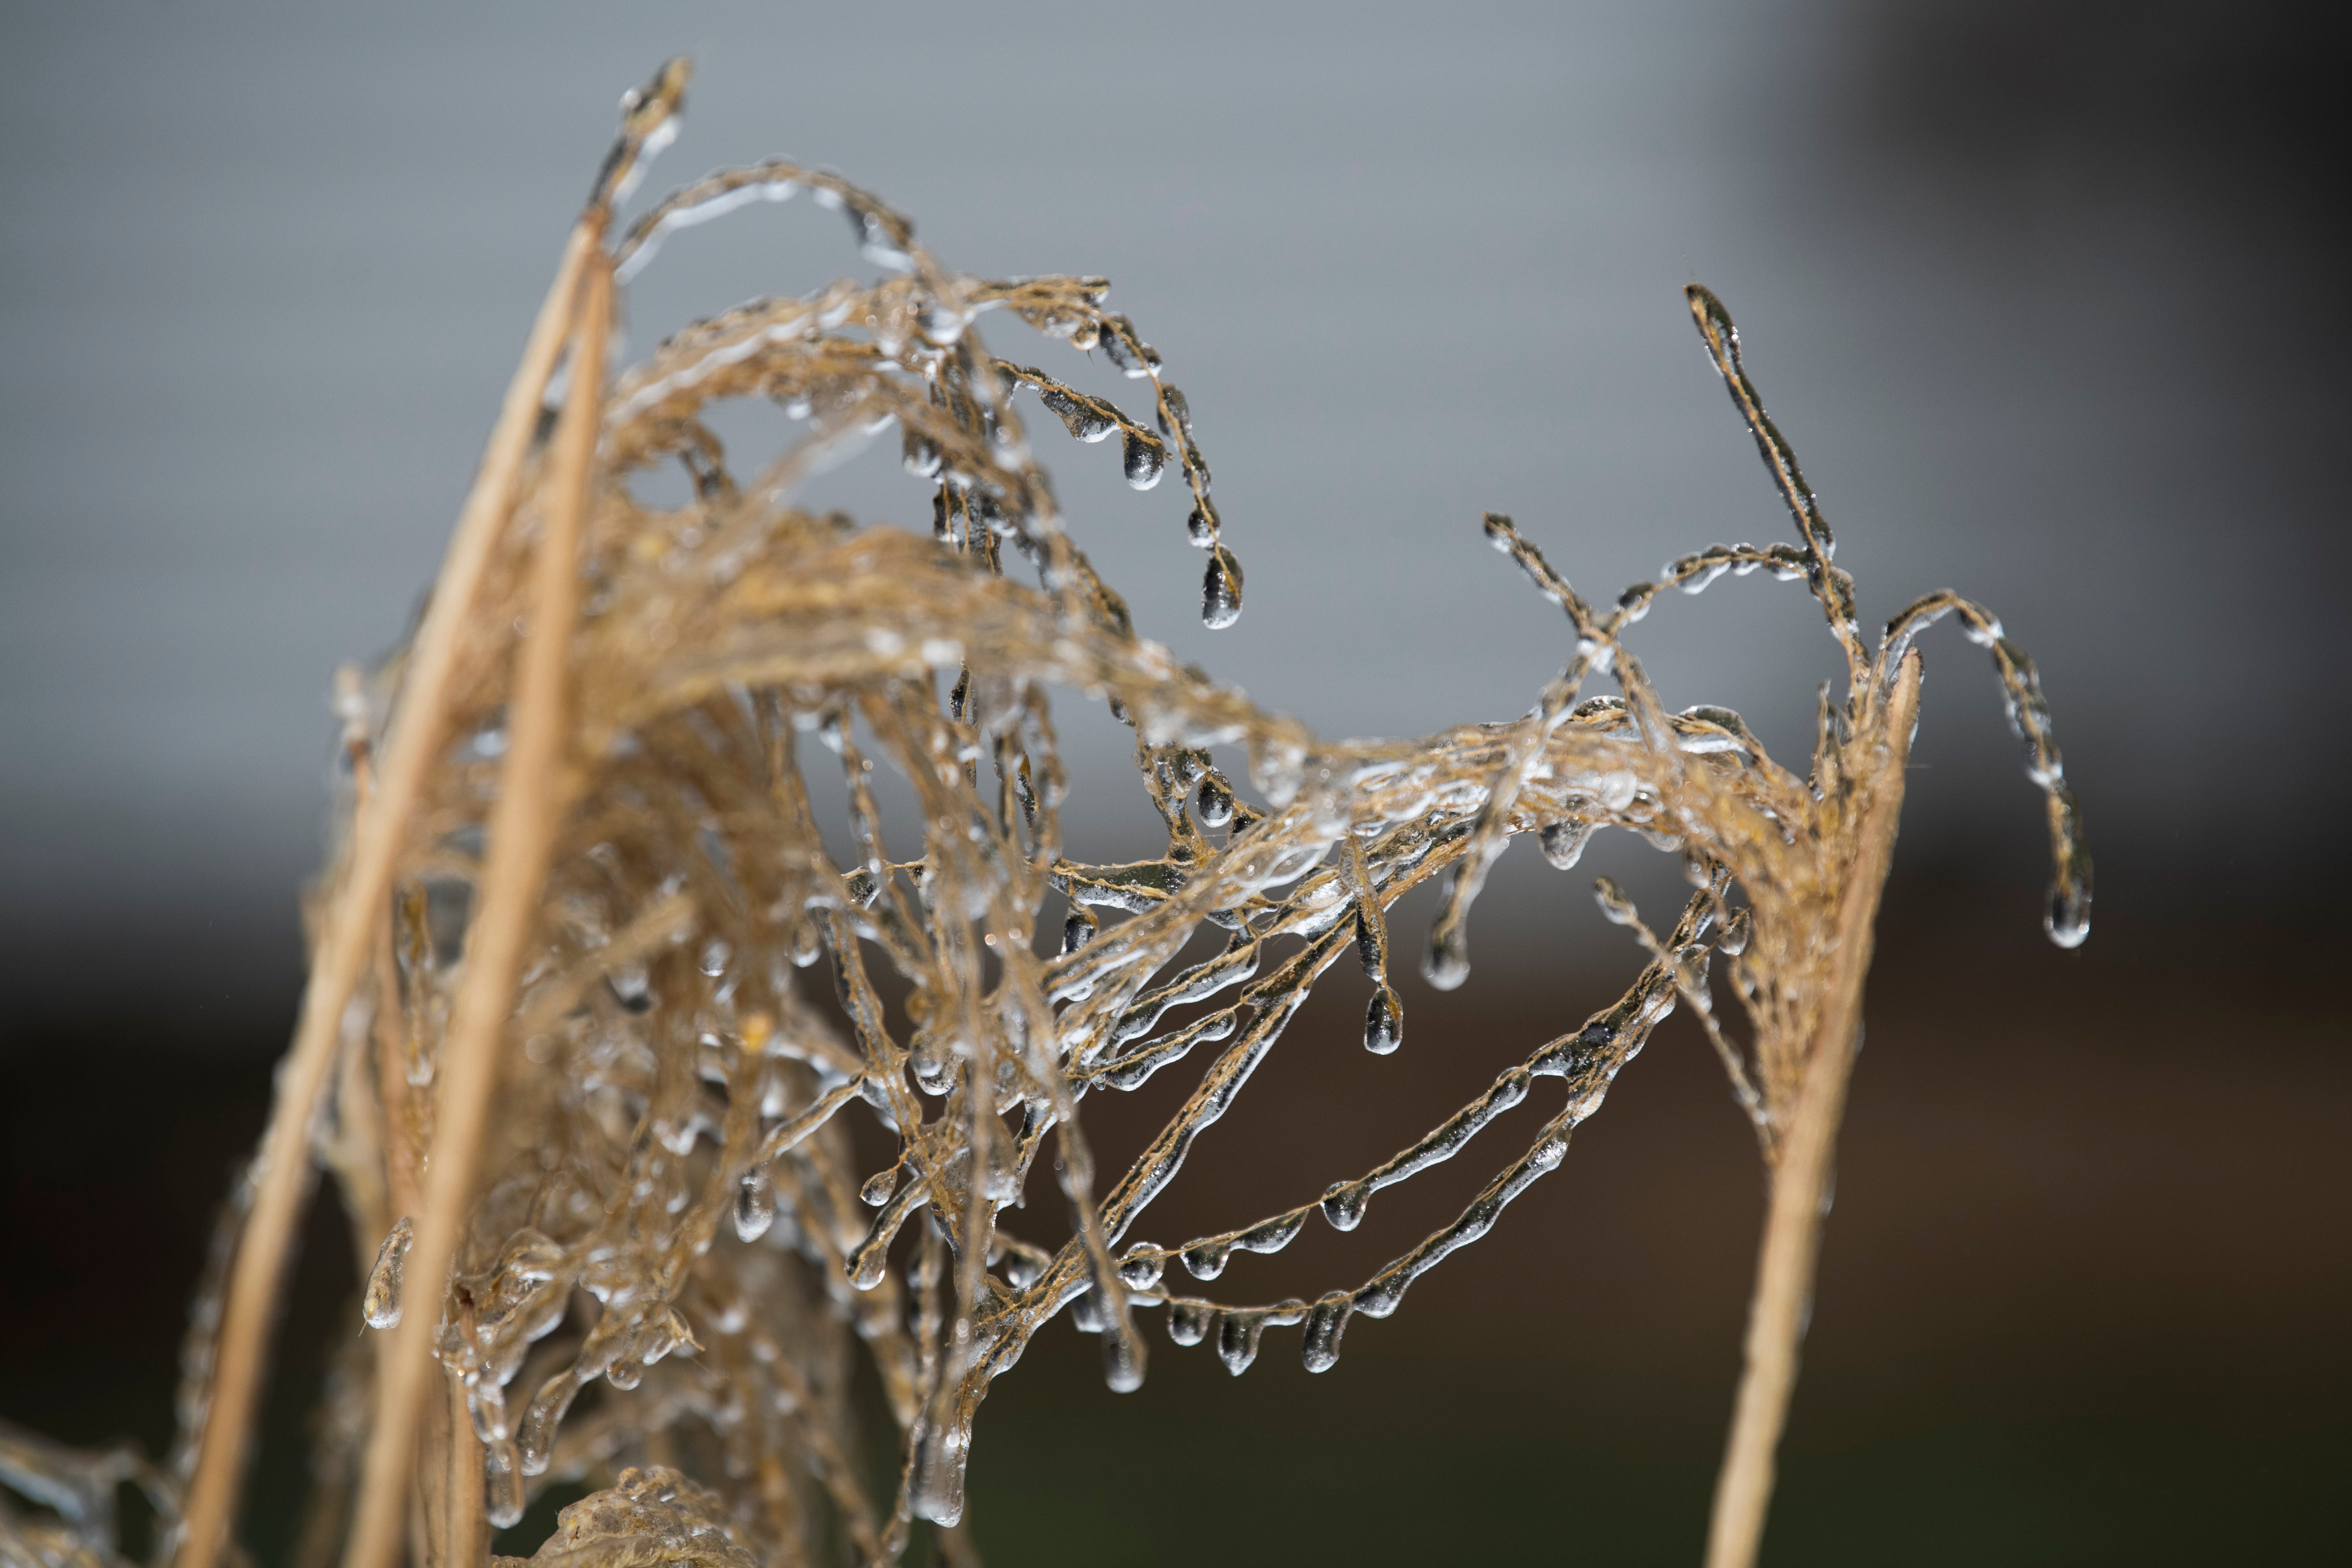 Ice clings to some tall grass in a yard in Grosse Pointe Woods on the morning of Thursday, February 23, 2023 after freezing rain coated Metro Detroit communities over night.